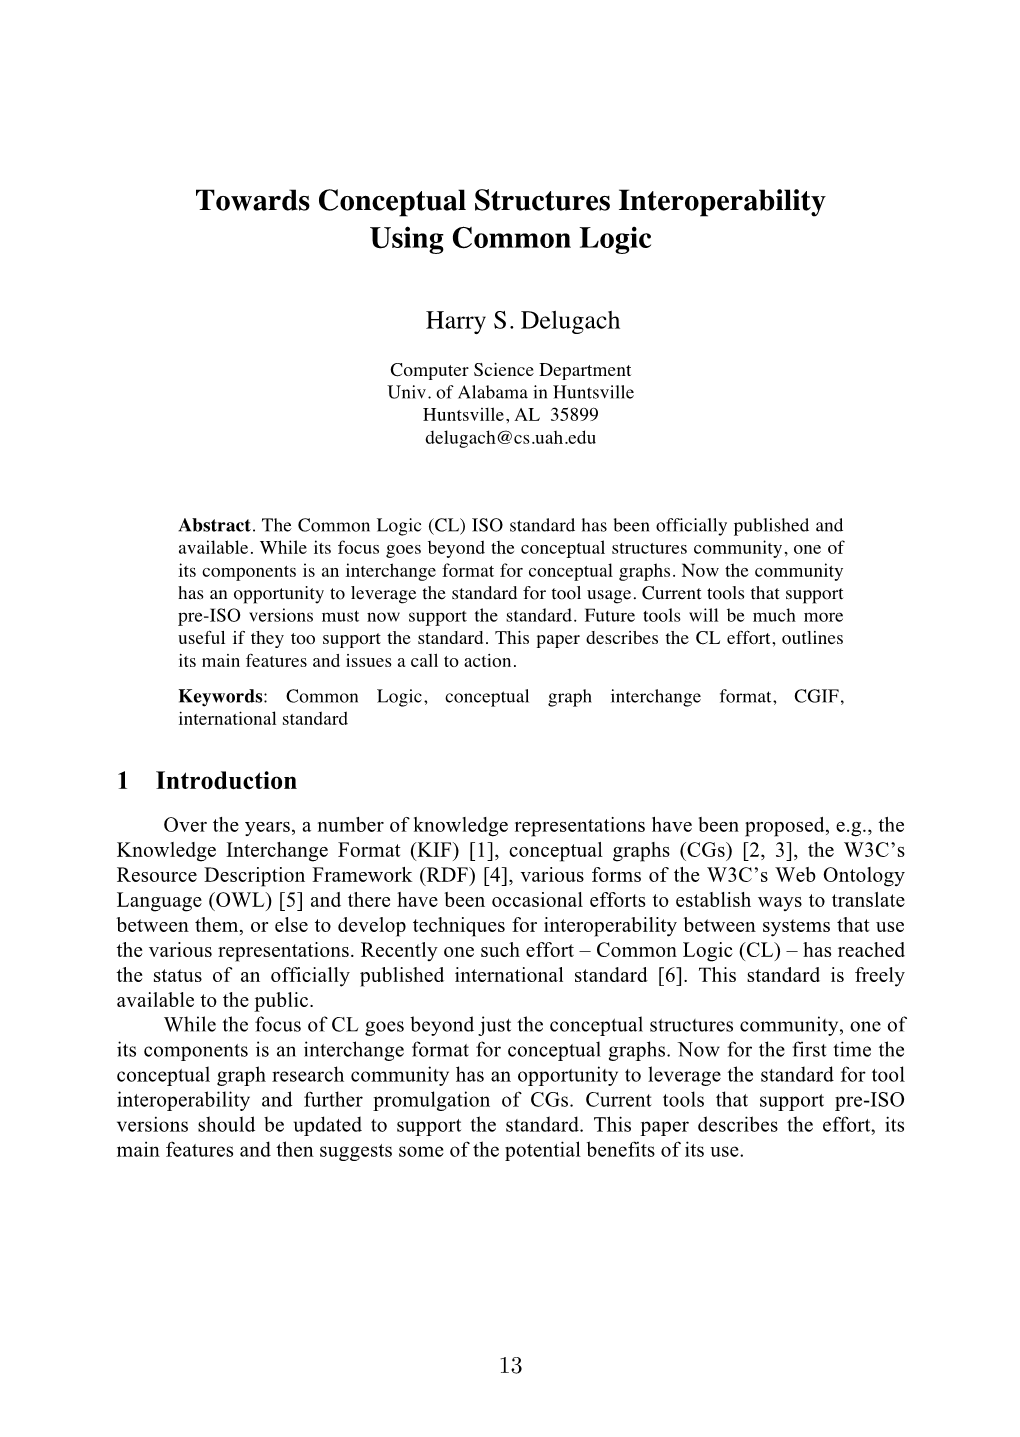 Towards Conceptual Structures Interoperability Using Common Logic